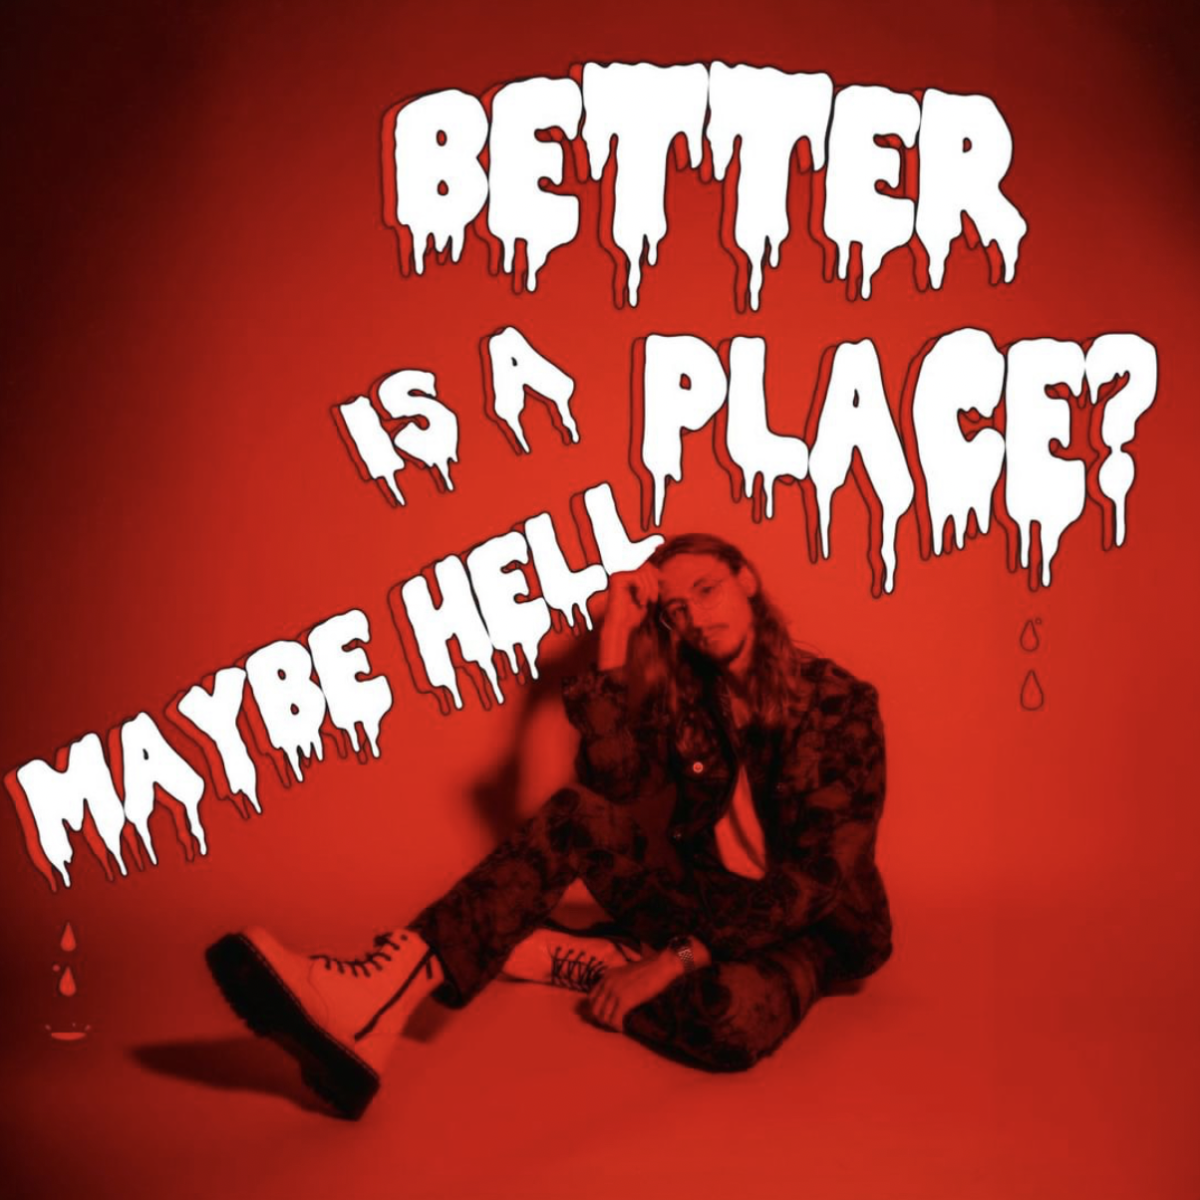 Micah Emrich will release Maybe Hell is a Better Place? March 1.